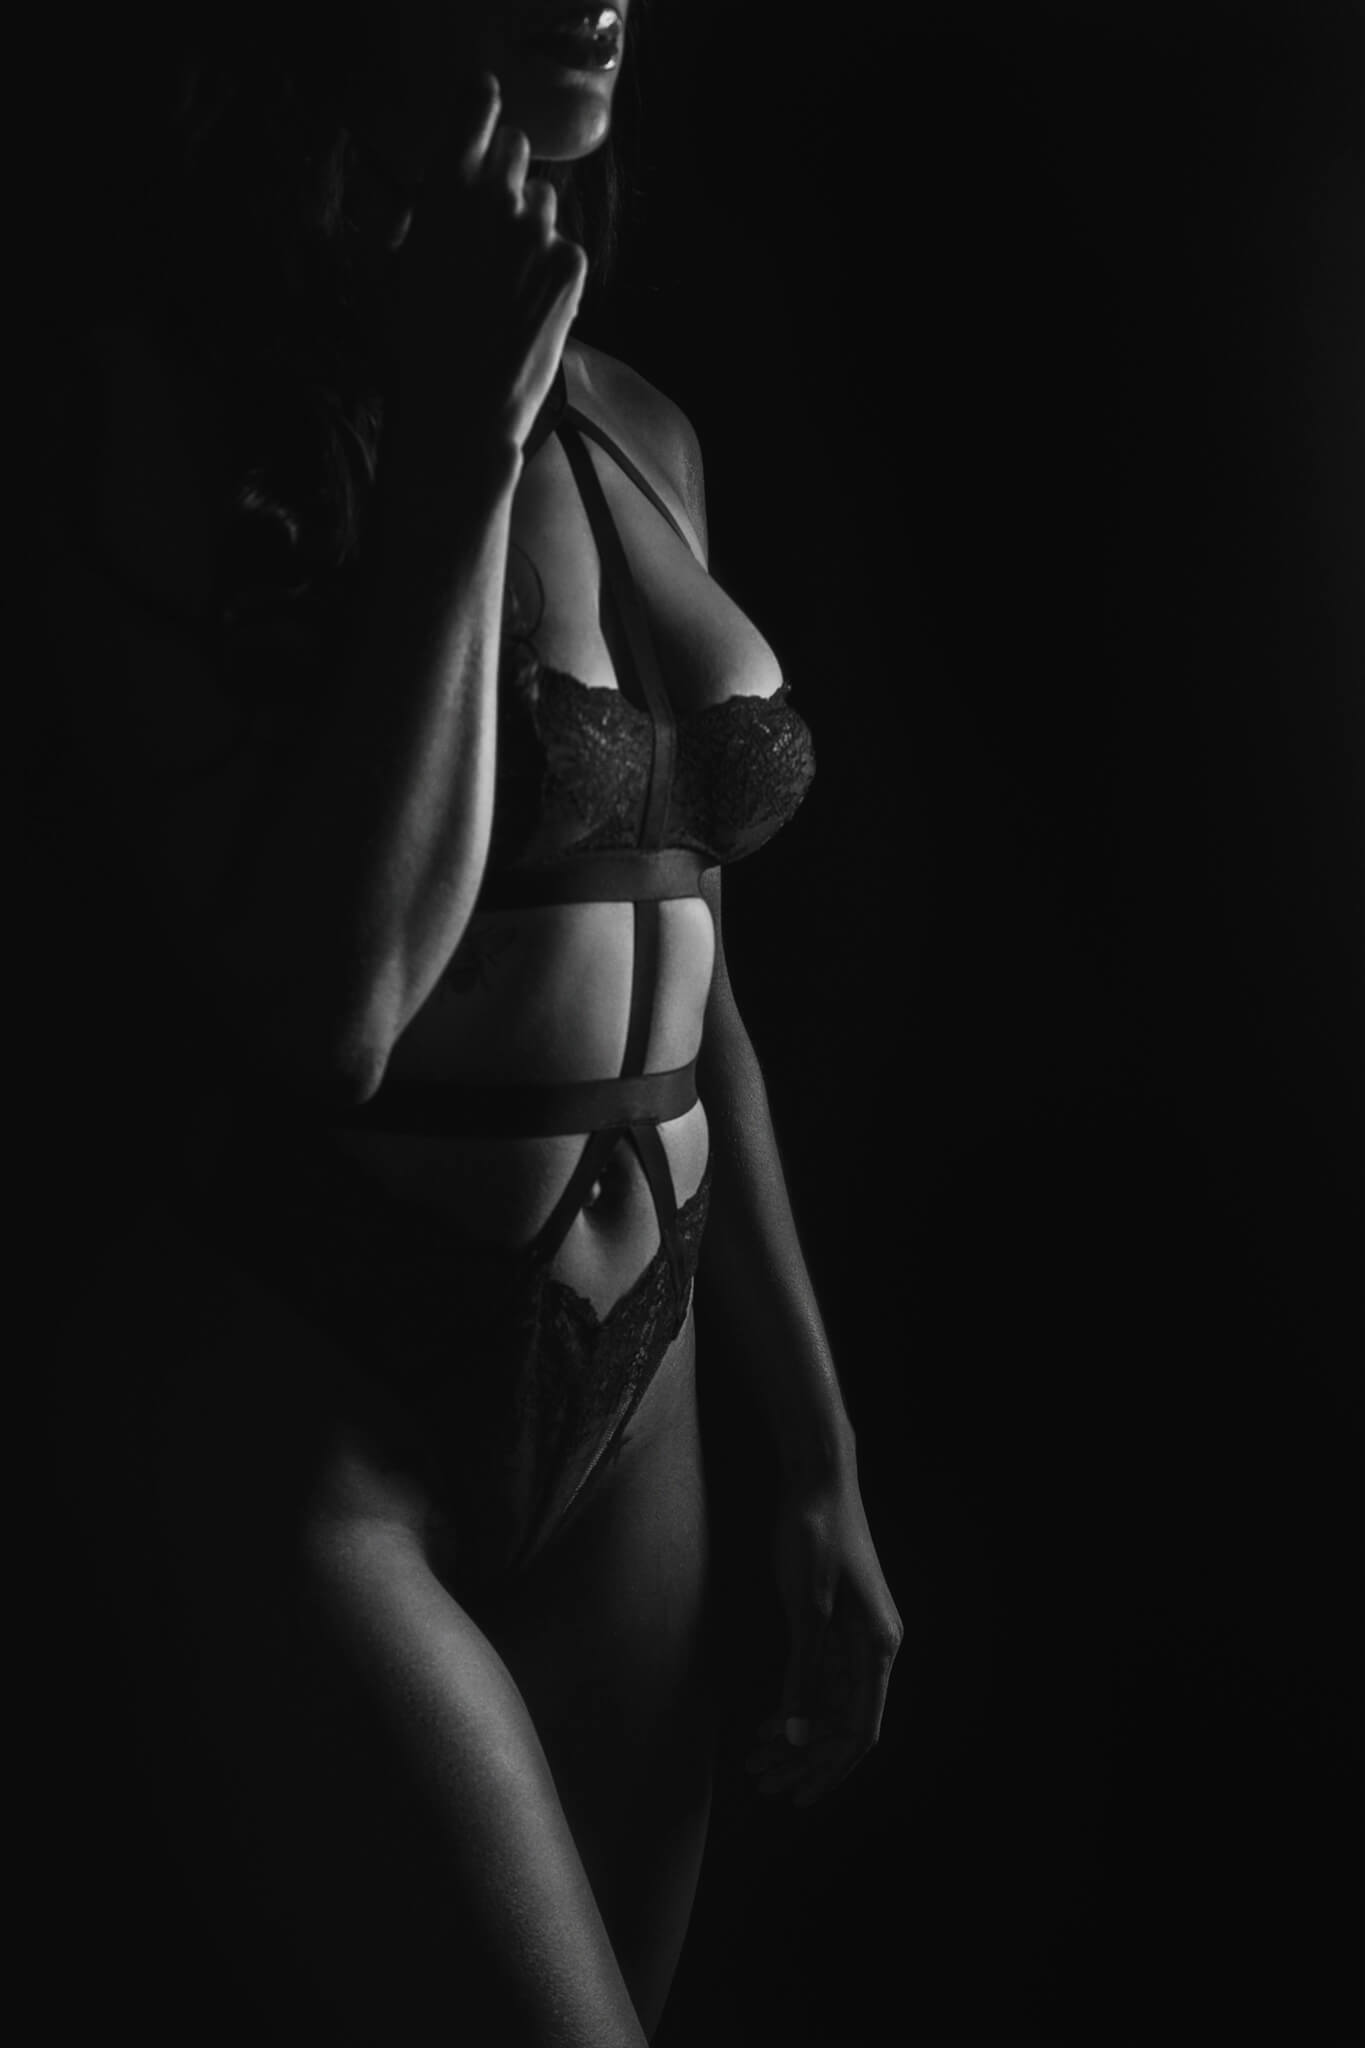 A dark image of a women in lace and strap lingerie walking in a studio